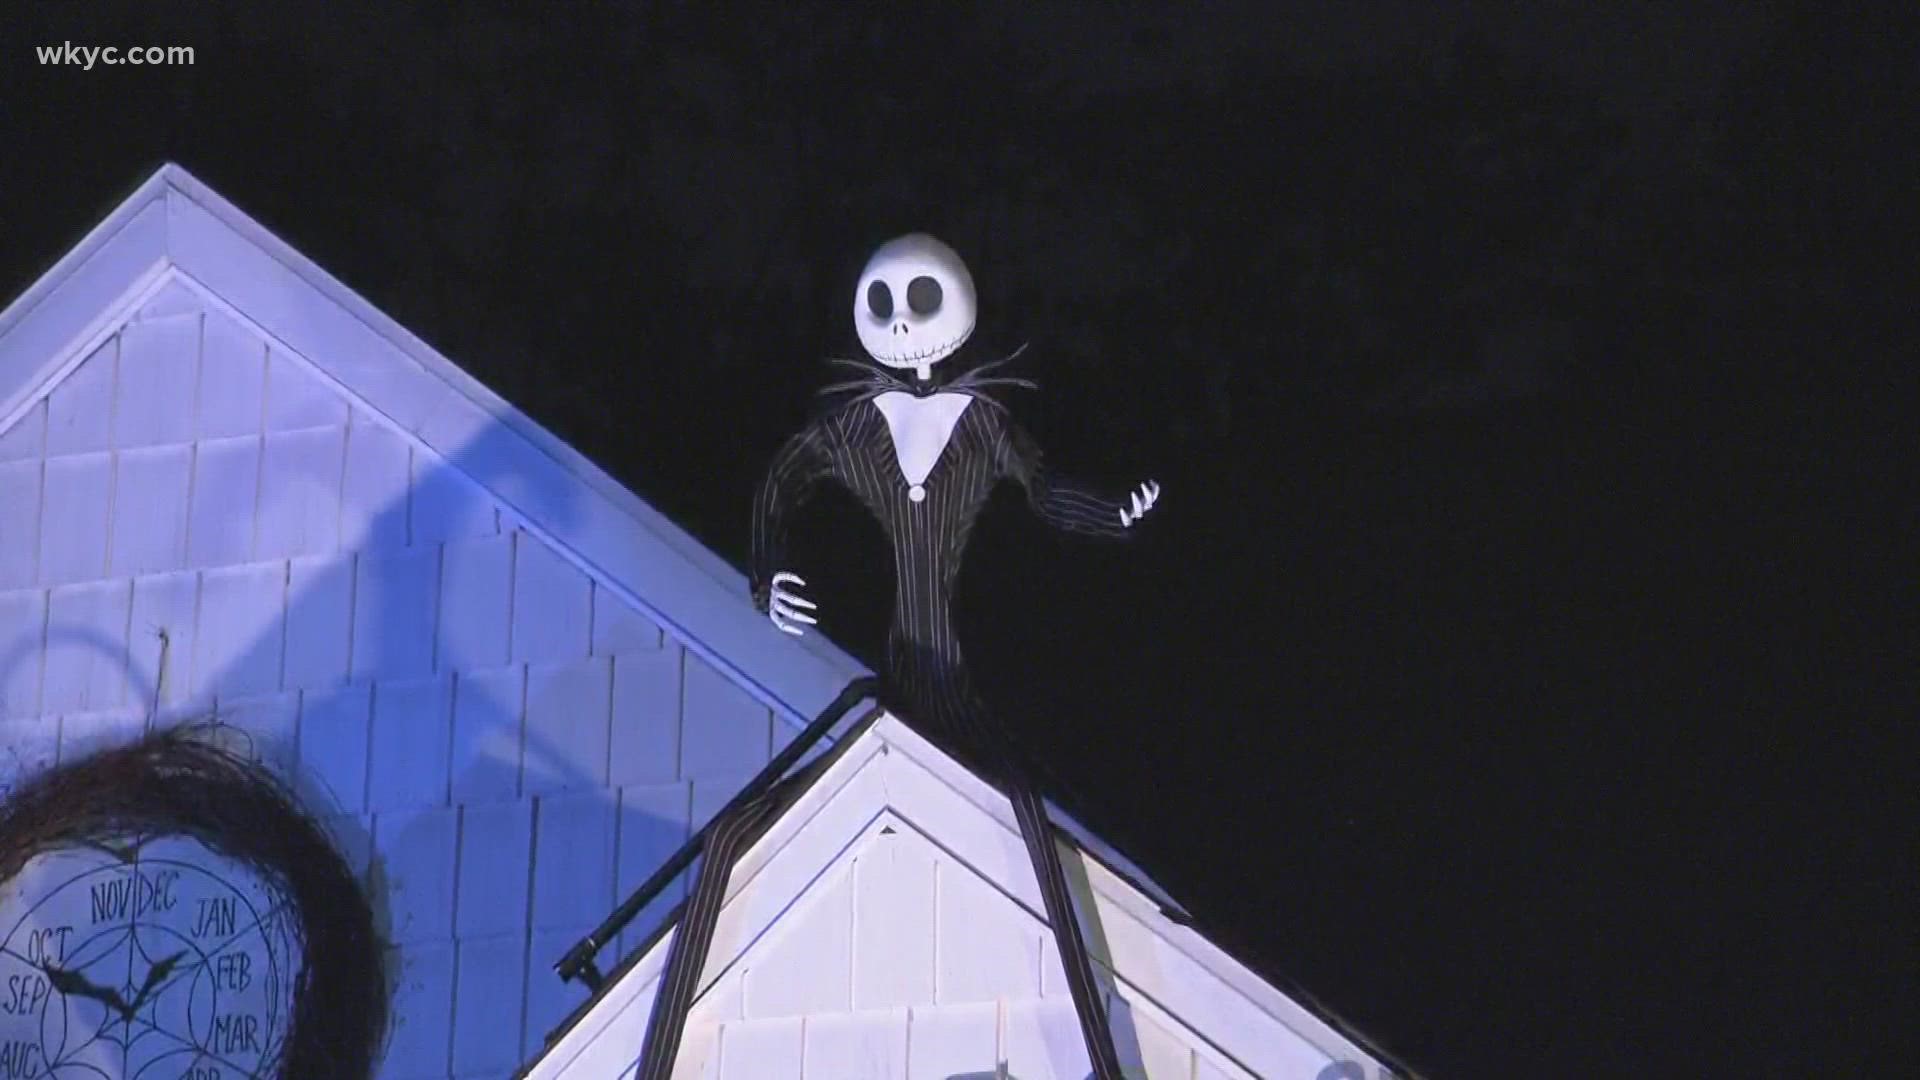 From Jack Skellington to Oogie Boogie, this house in Cuyahoga Falls is decorated for Halloween with characters from The Nightmare Before Christmas.